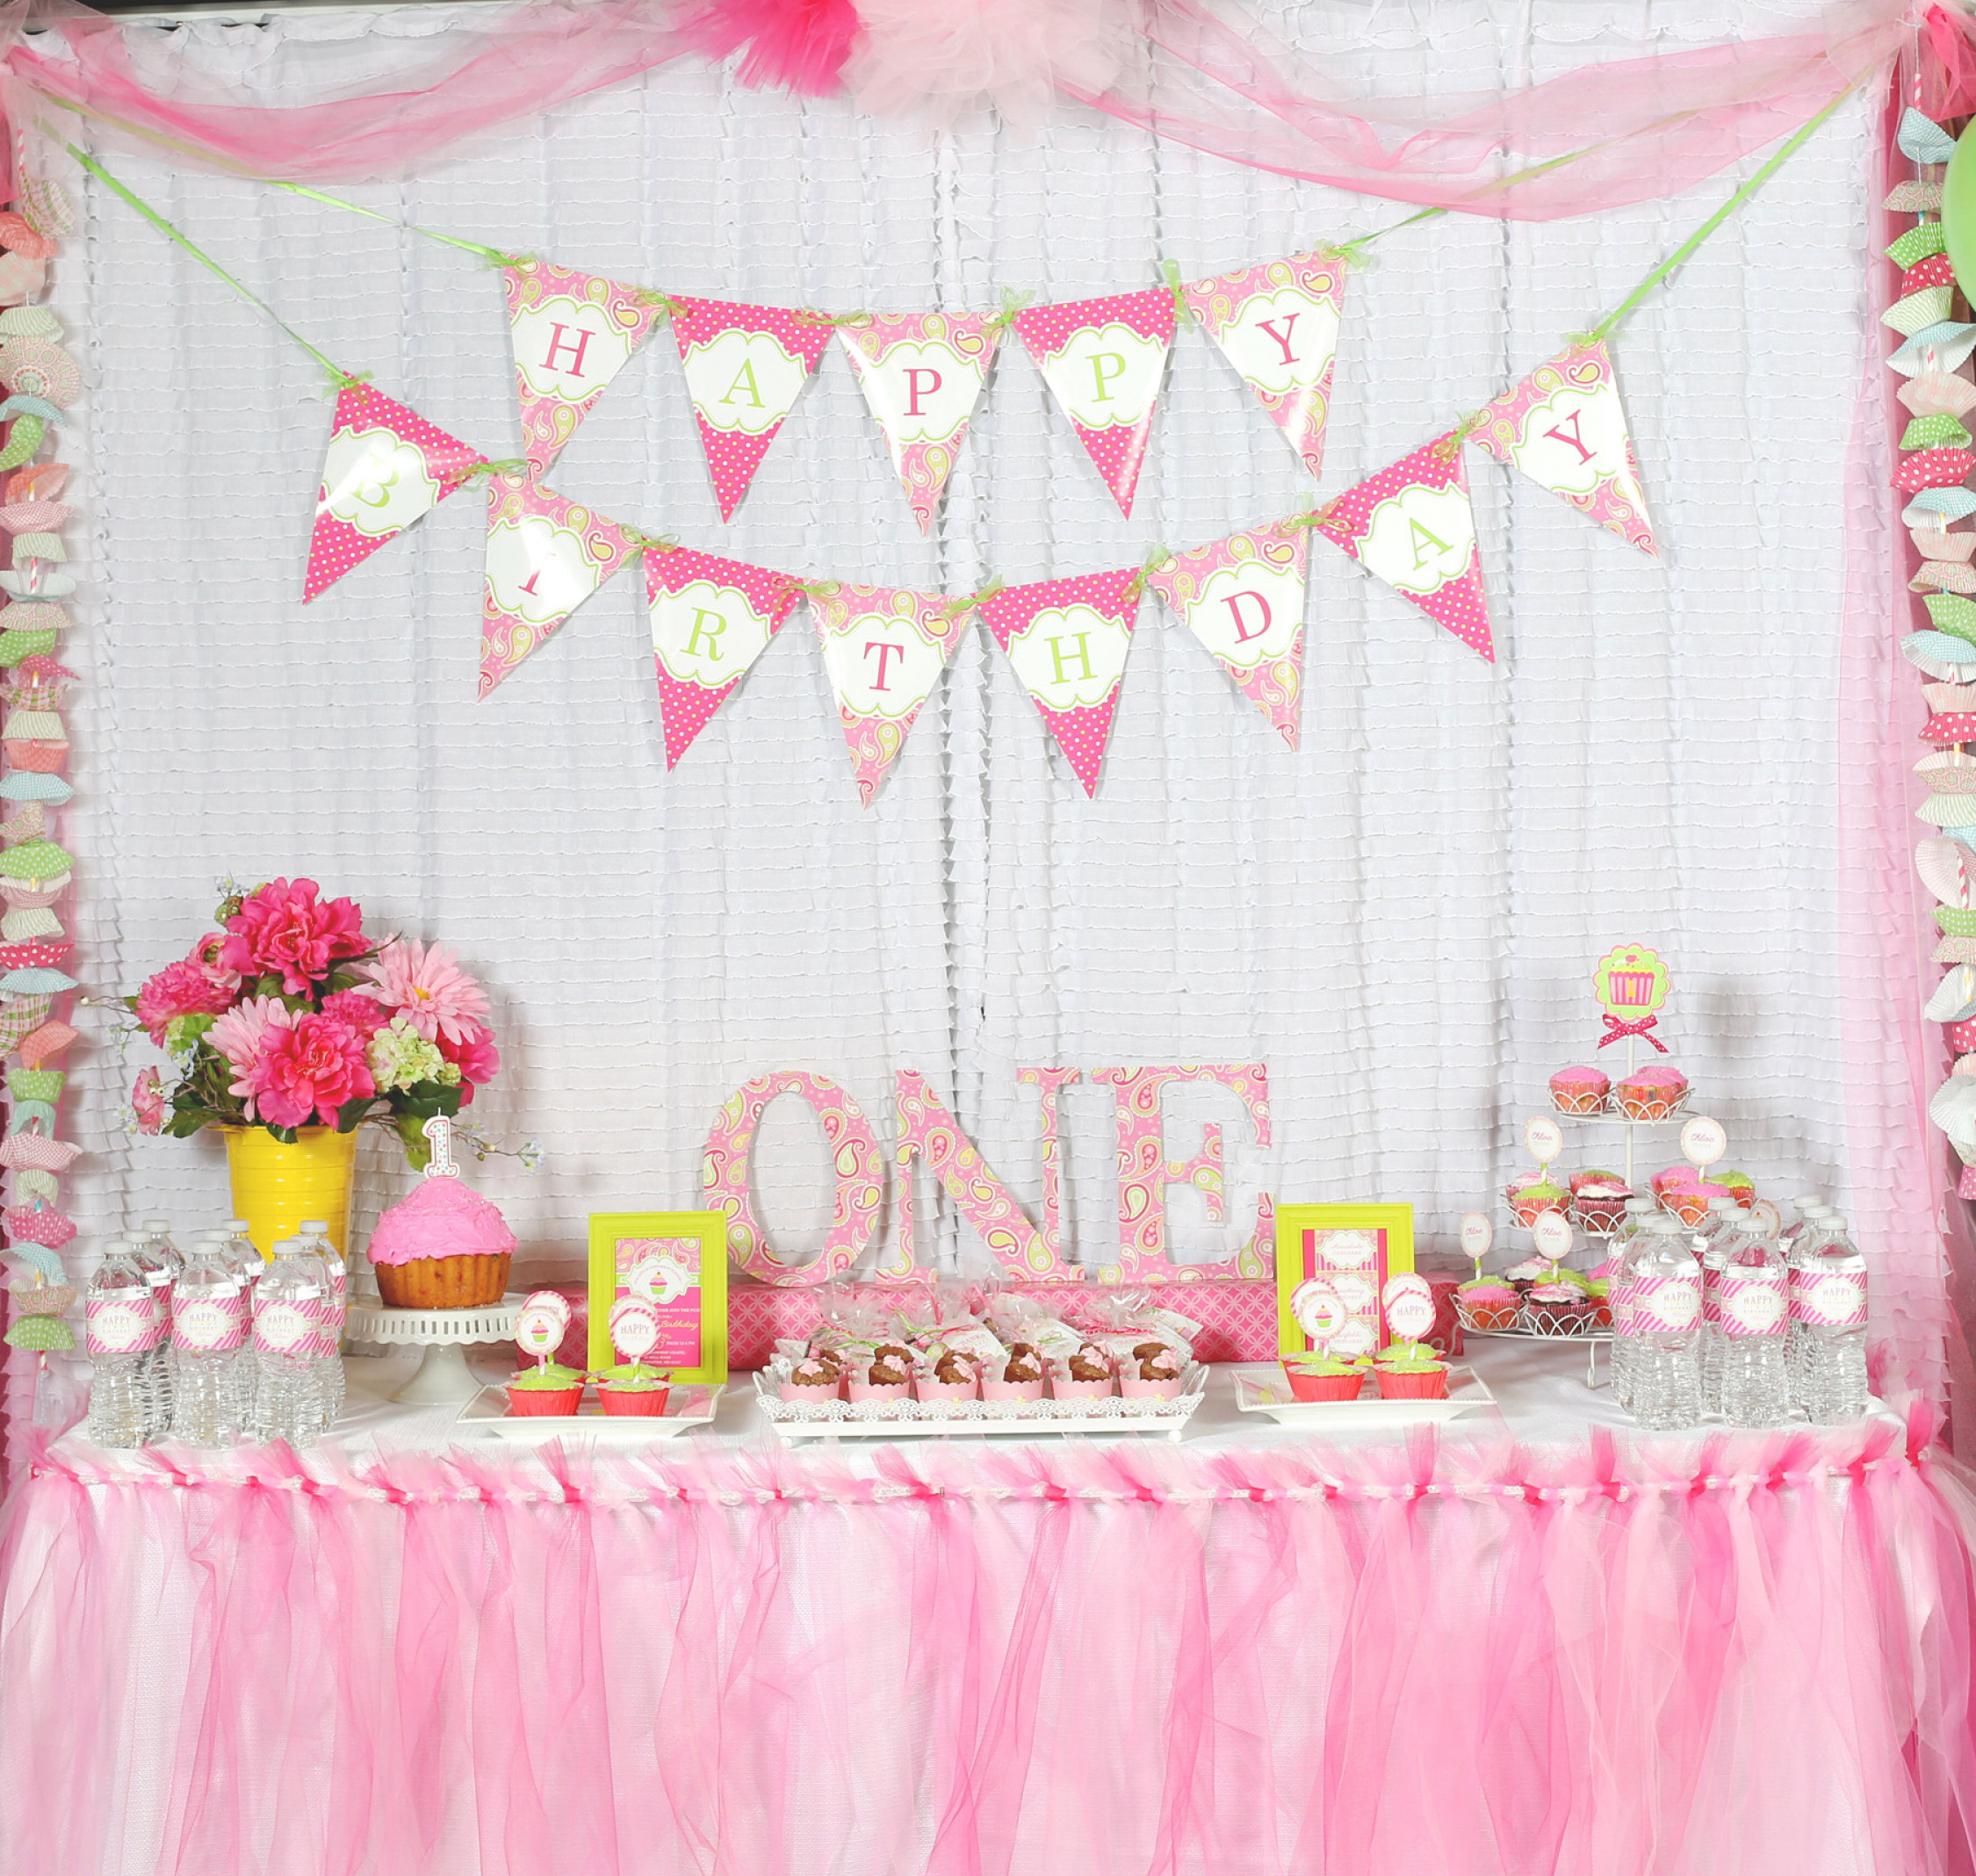 First Birthday Party Decoration Ideas
 A Cupcake Themed 1st Birthday party with Paisley and Polka